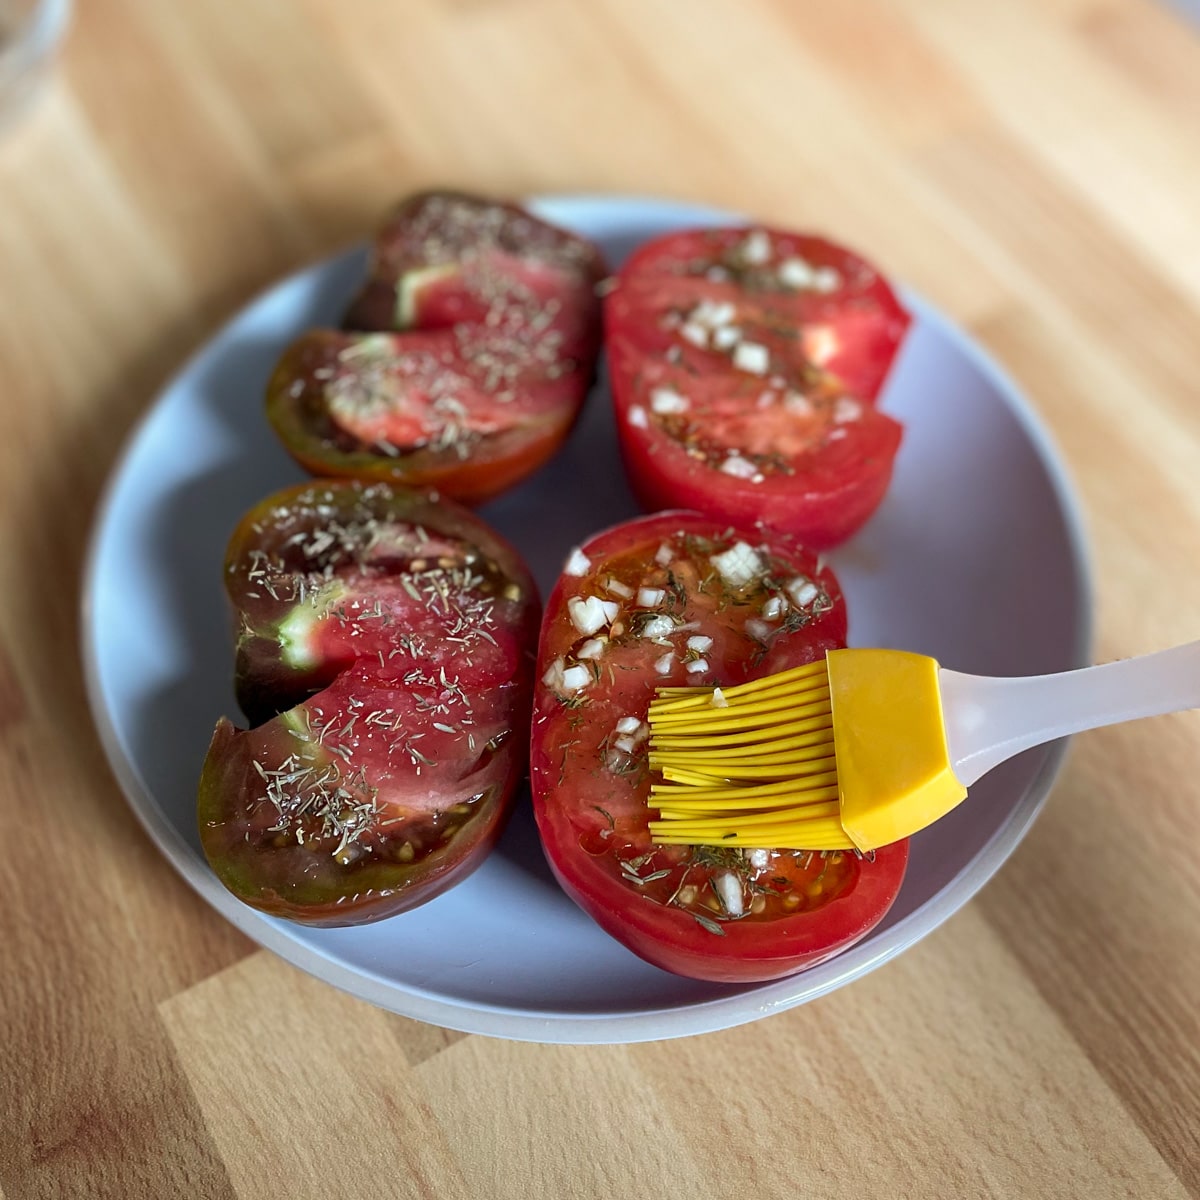 Minced garlic is spread on the cut side of a halved red heirloom tomato with a yellow silicone brush.